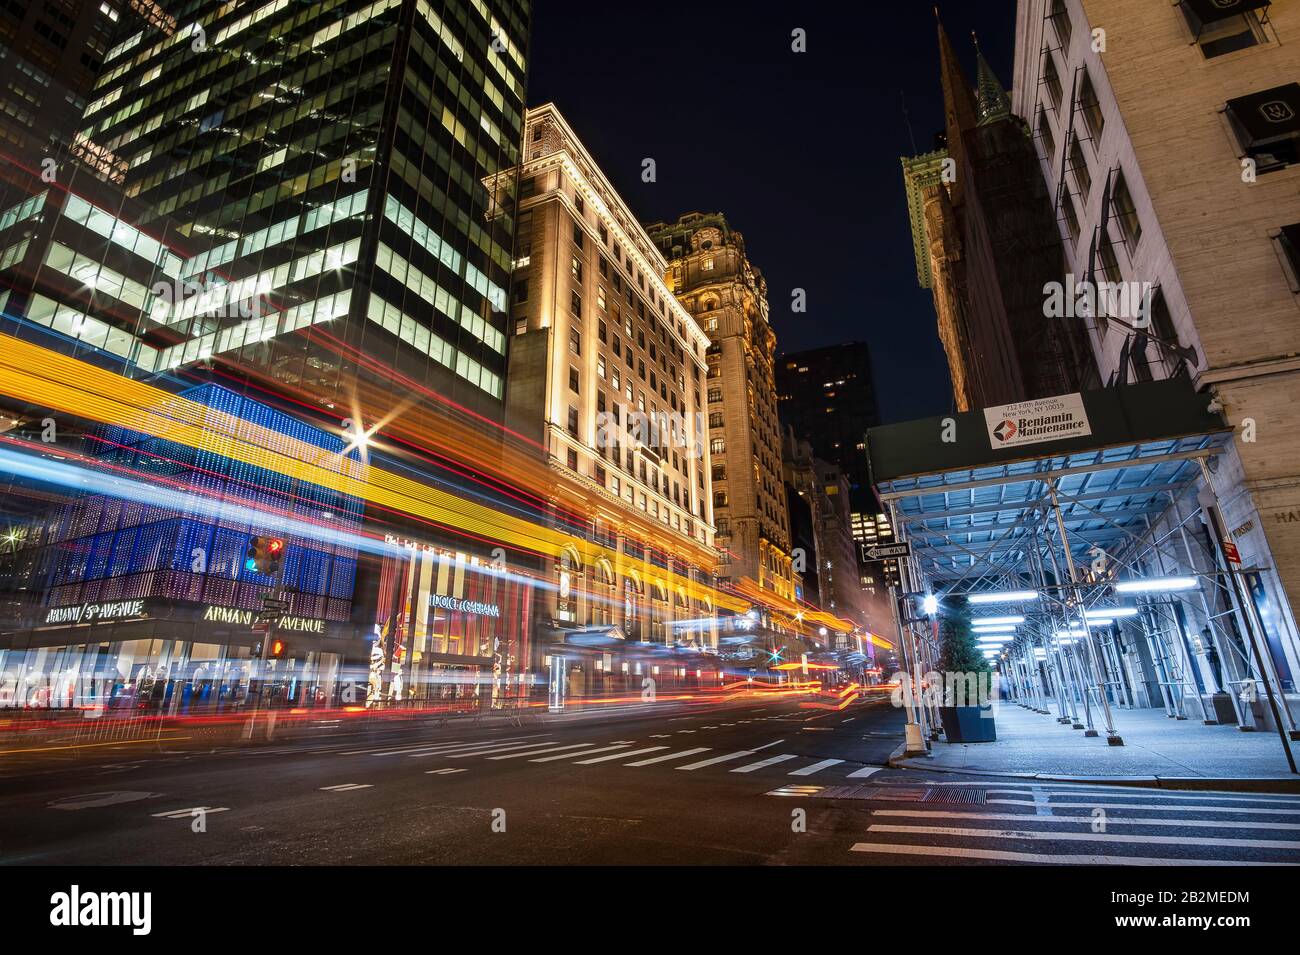 New York NY - USA - Jul 30 2019: Fifth Avenue at night with light trail in New York City Stock Photo